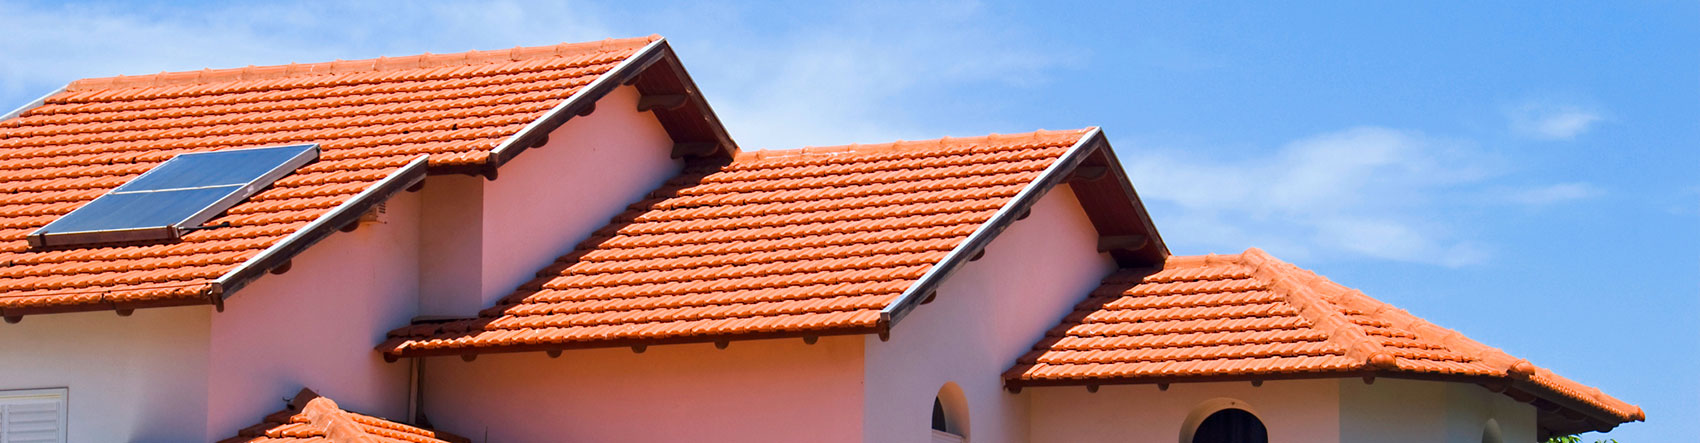 tiered-terracotta-tile-roof